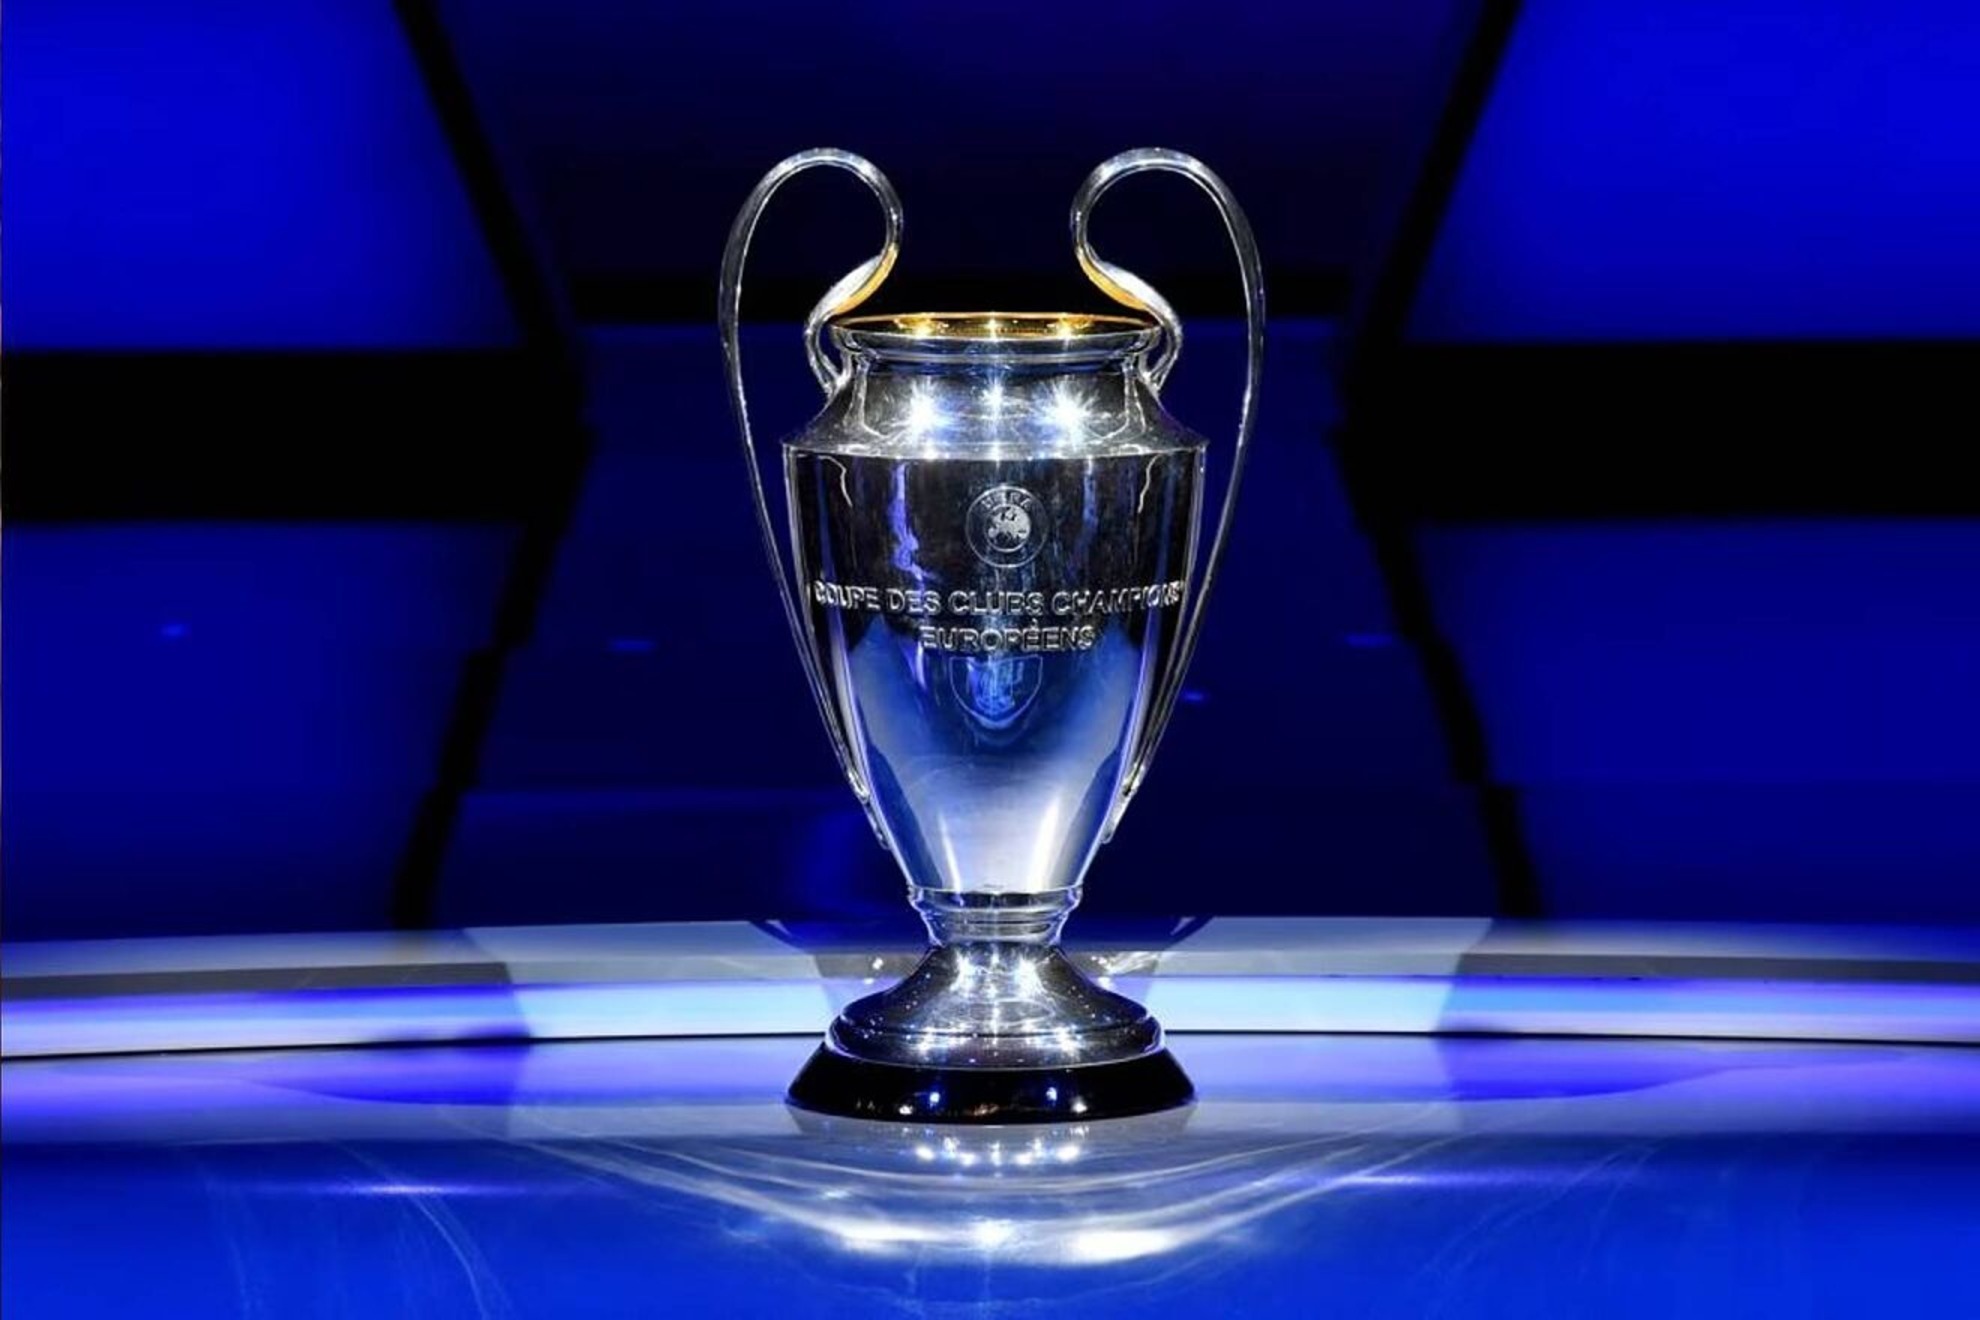 Champions League quarter-final draw: Date, teams, rules and conditions